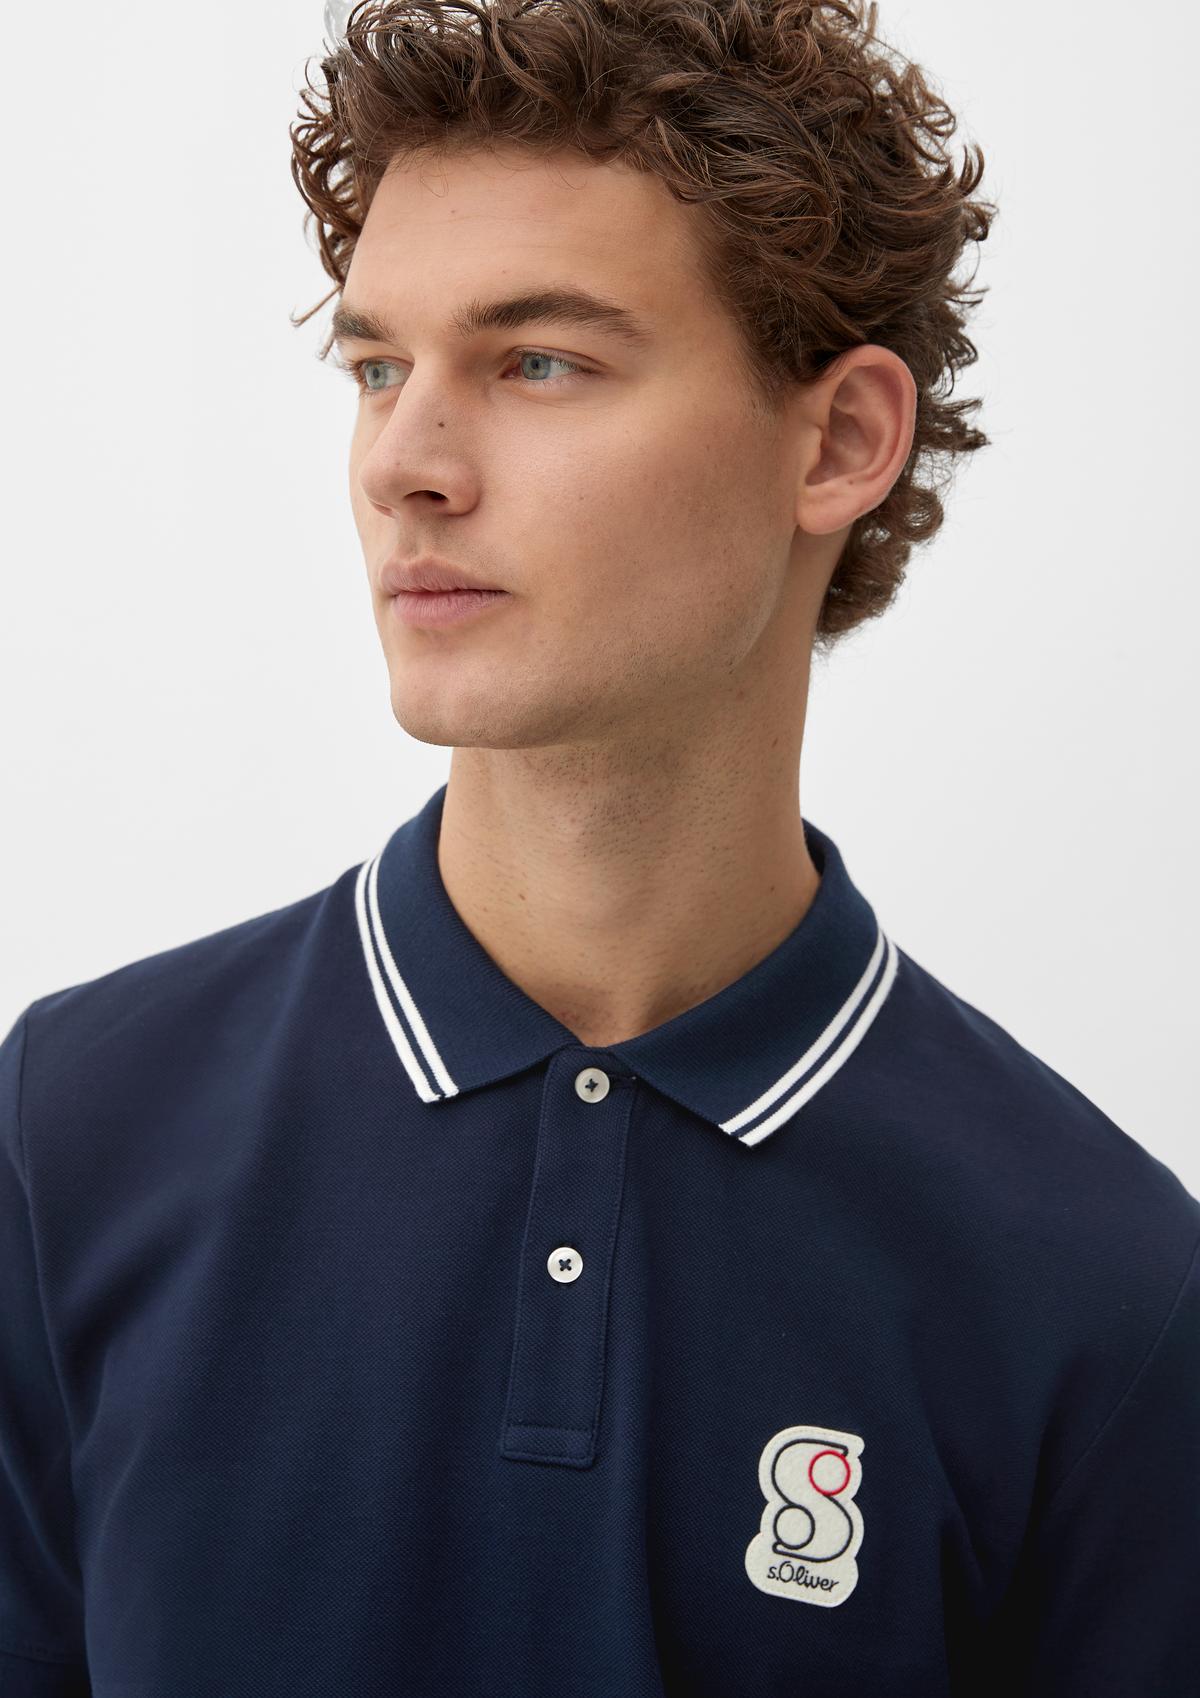 s.Oliver Poloshirt mit Labelpatch